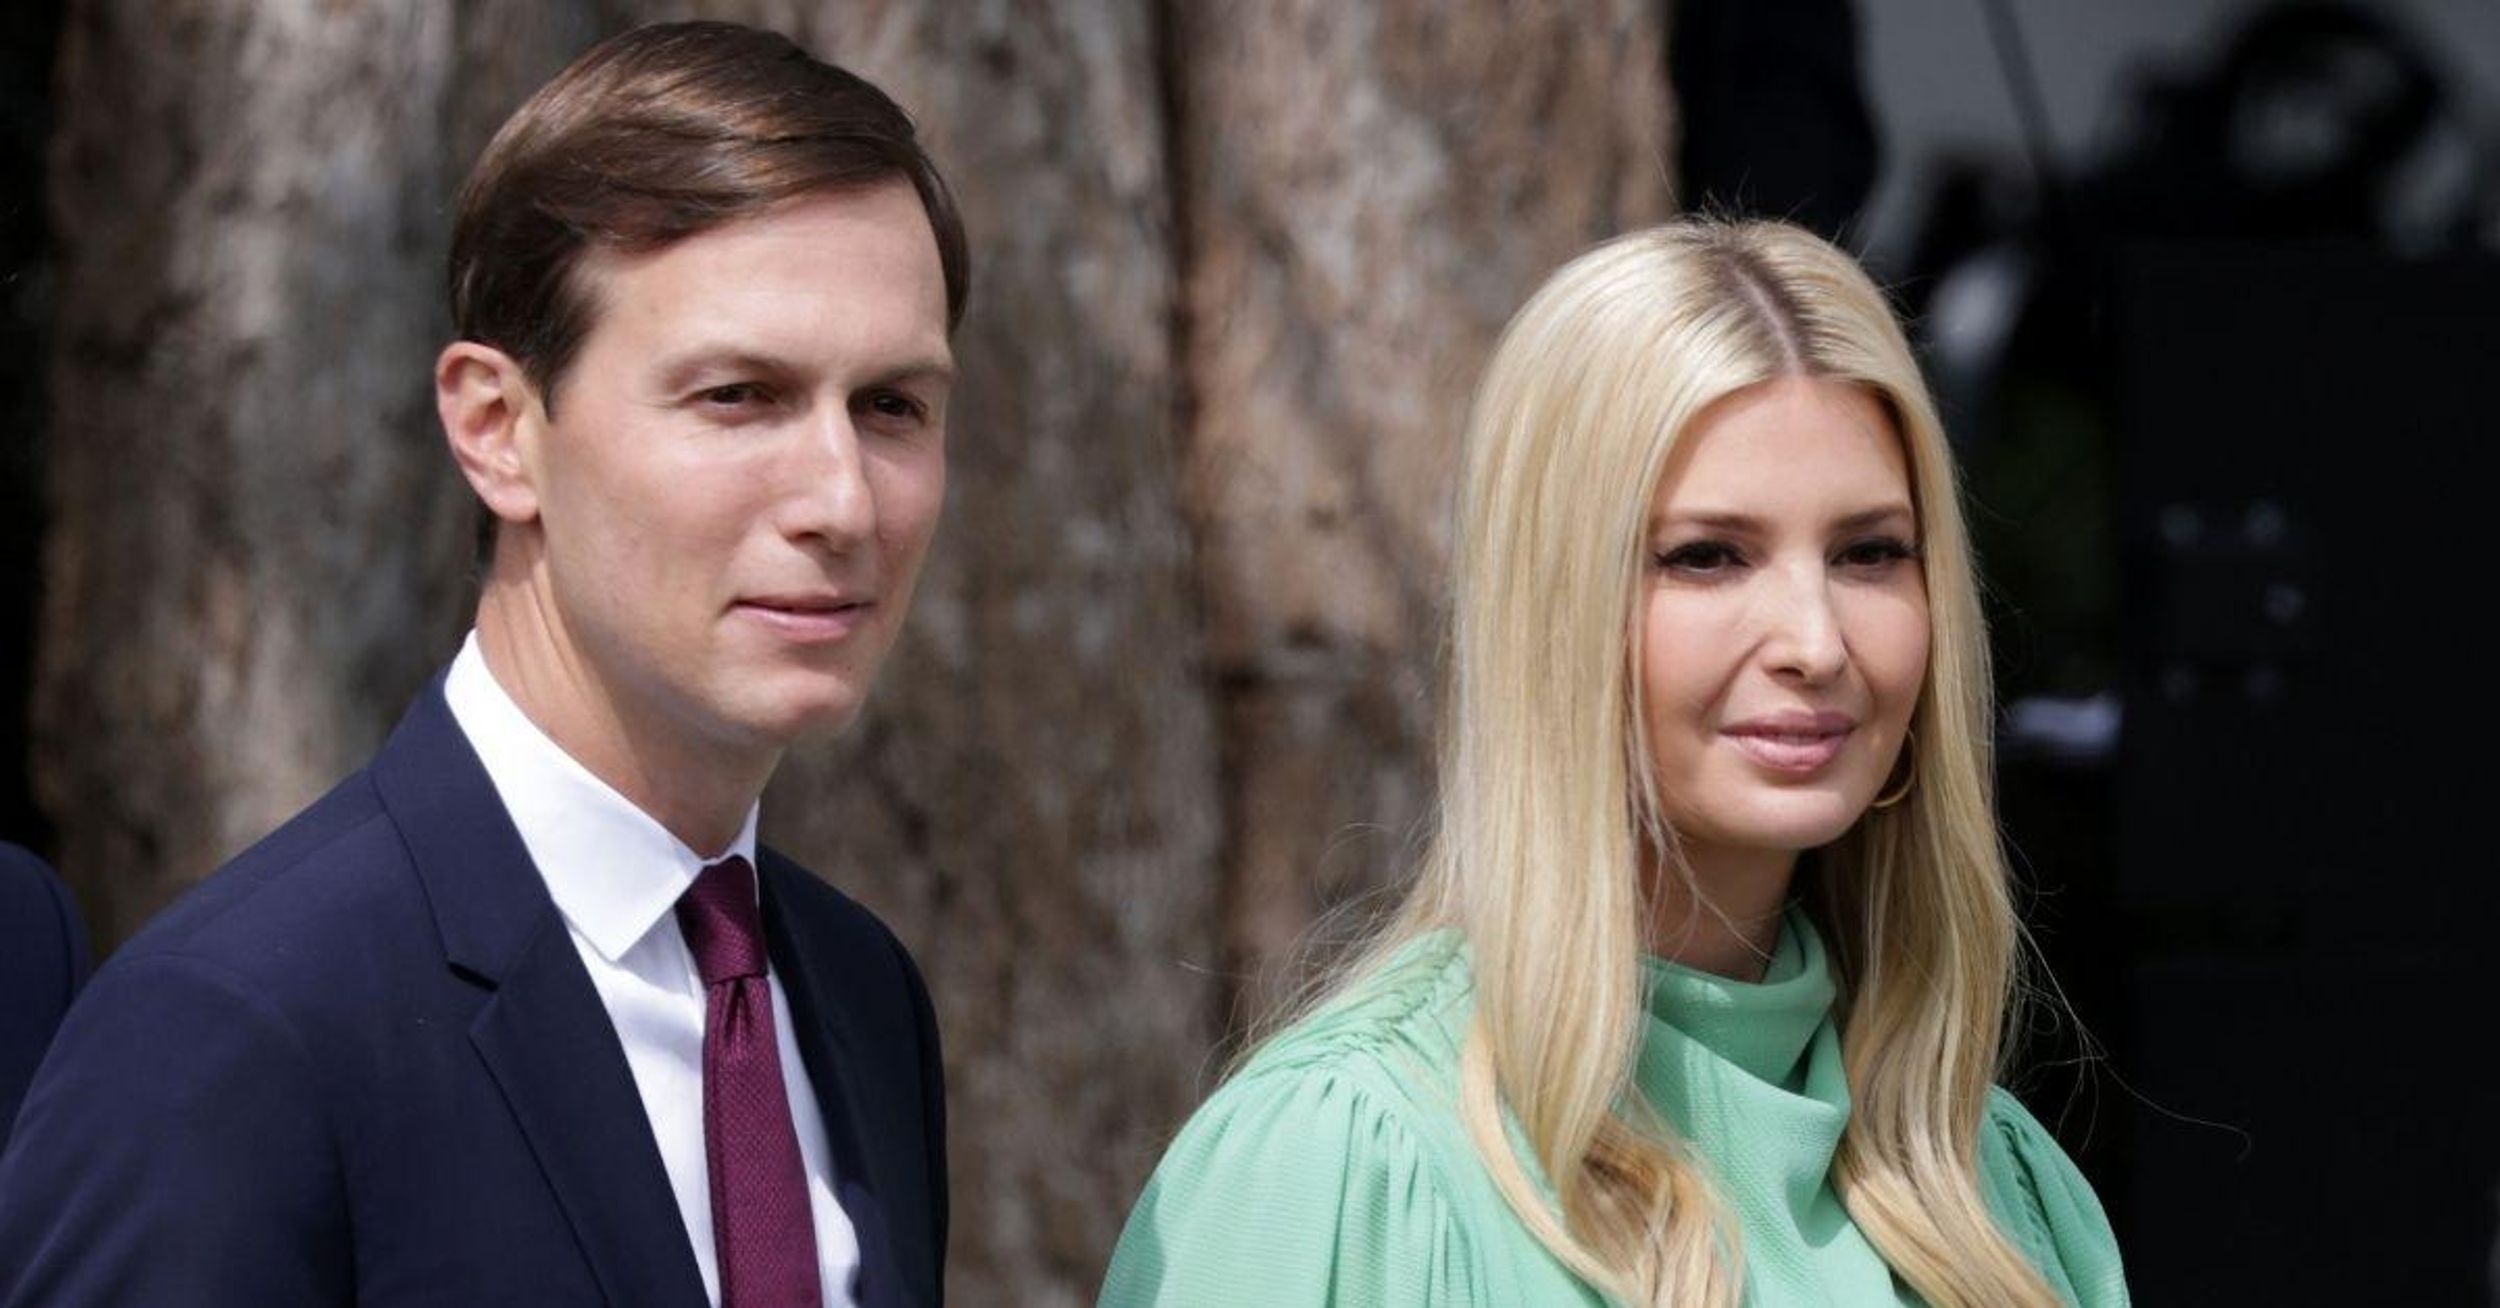 Watchdog Group Details Massive Amount Of Outside Income Jared And Ivanka Made As Trump Advisers